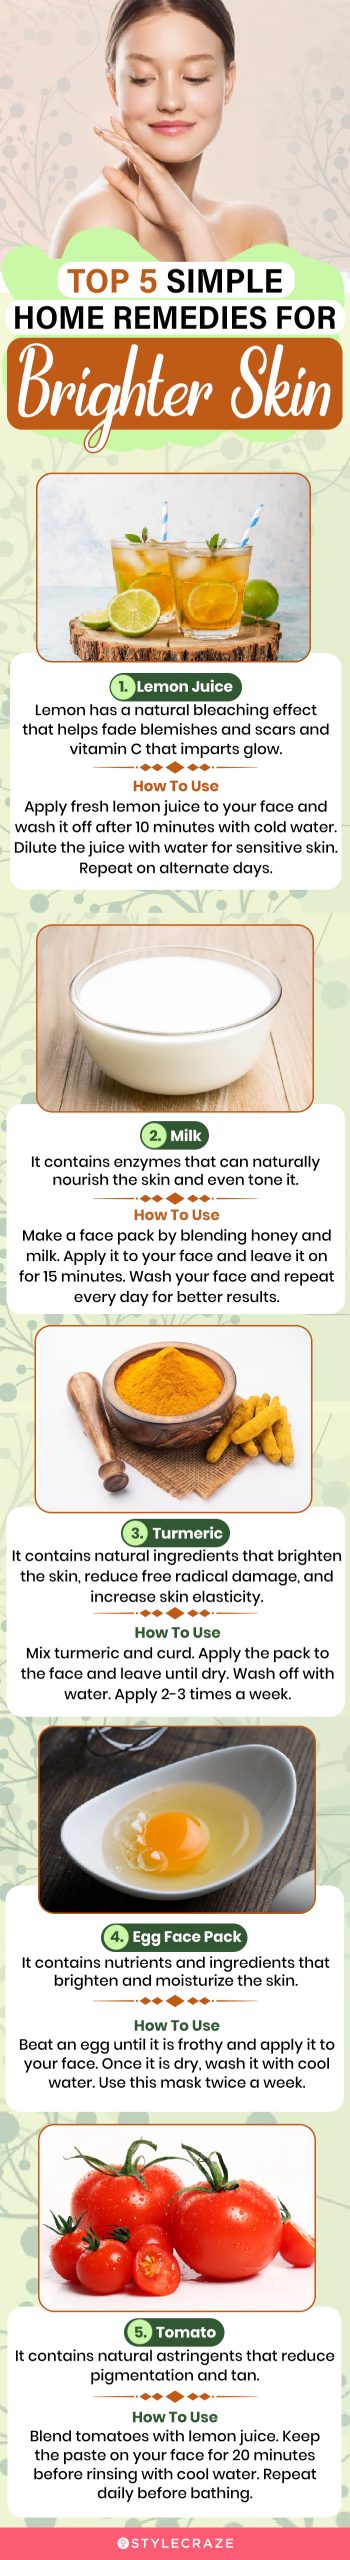 top 5 simple home remedies for brighter skin (infographic)